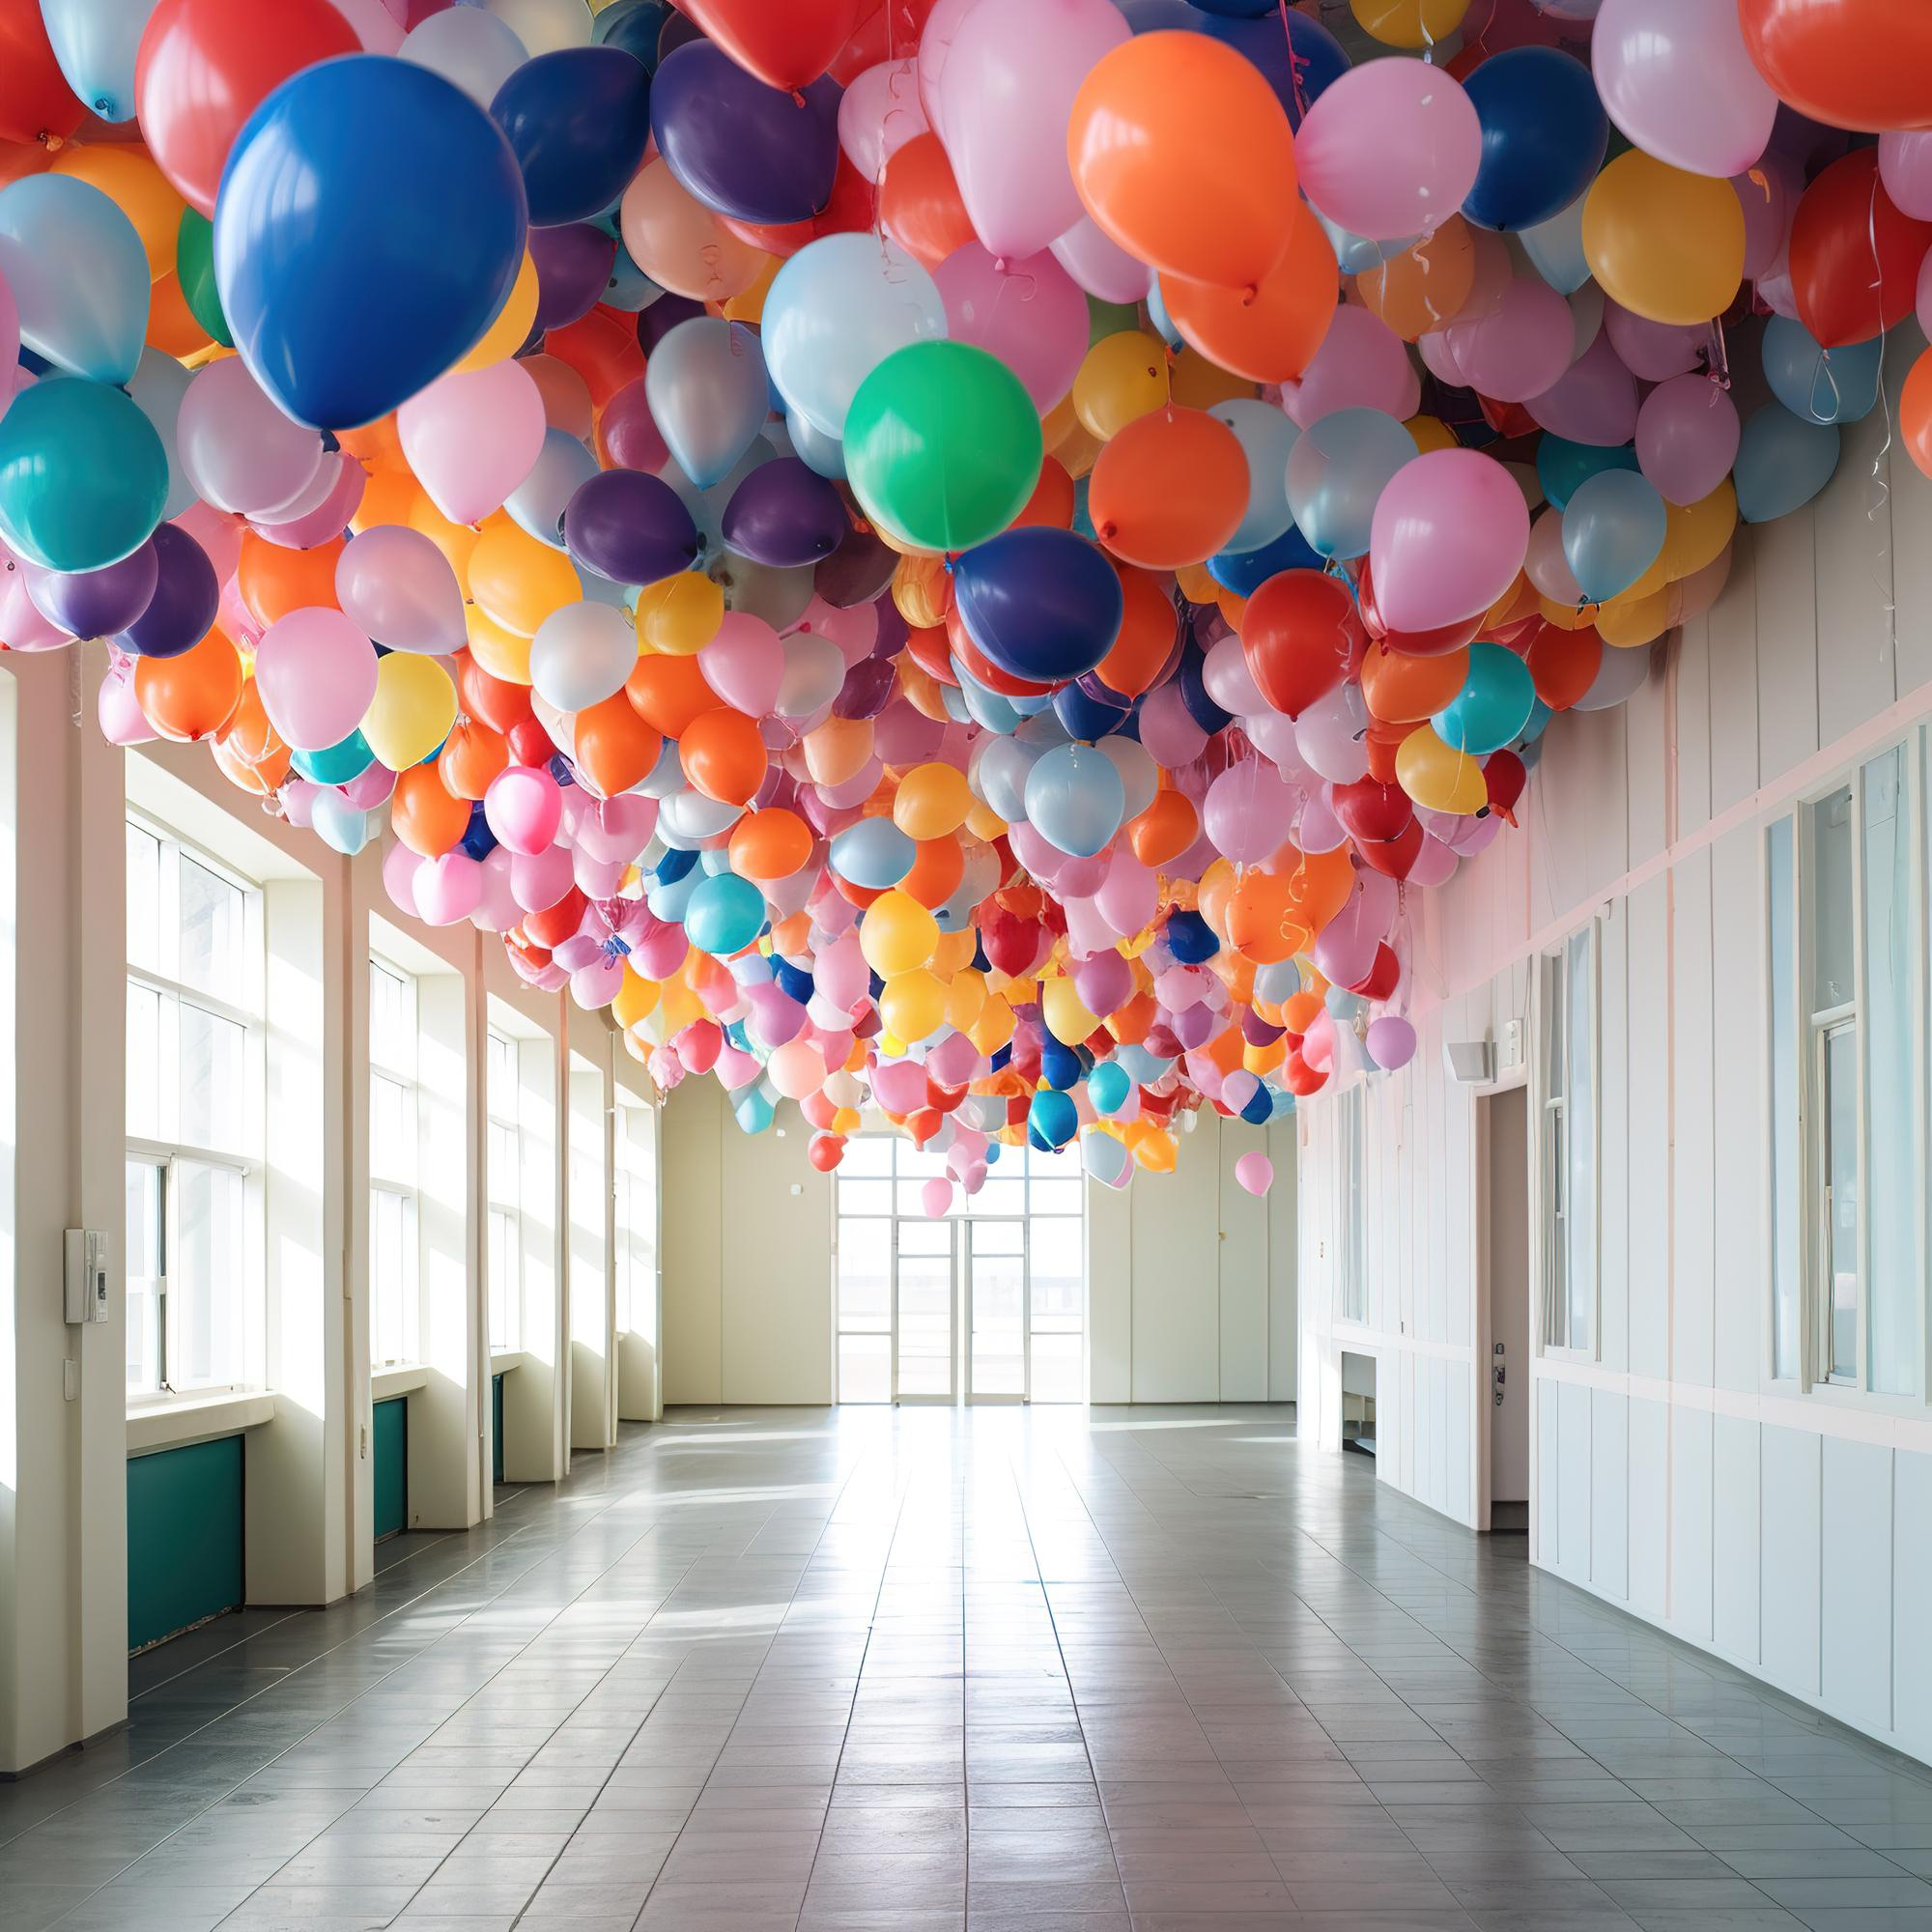 How to decorate the ceiling of a room with balloons and without using Helium